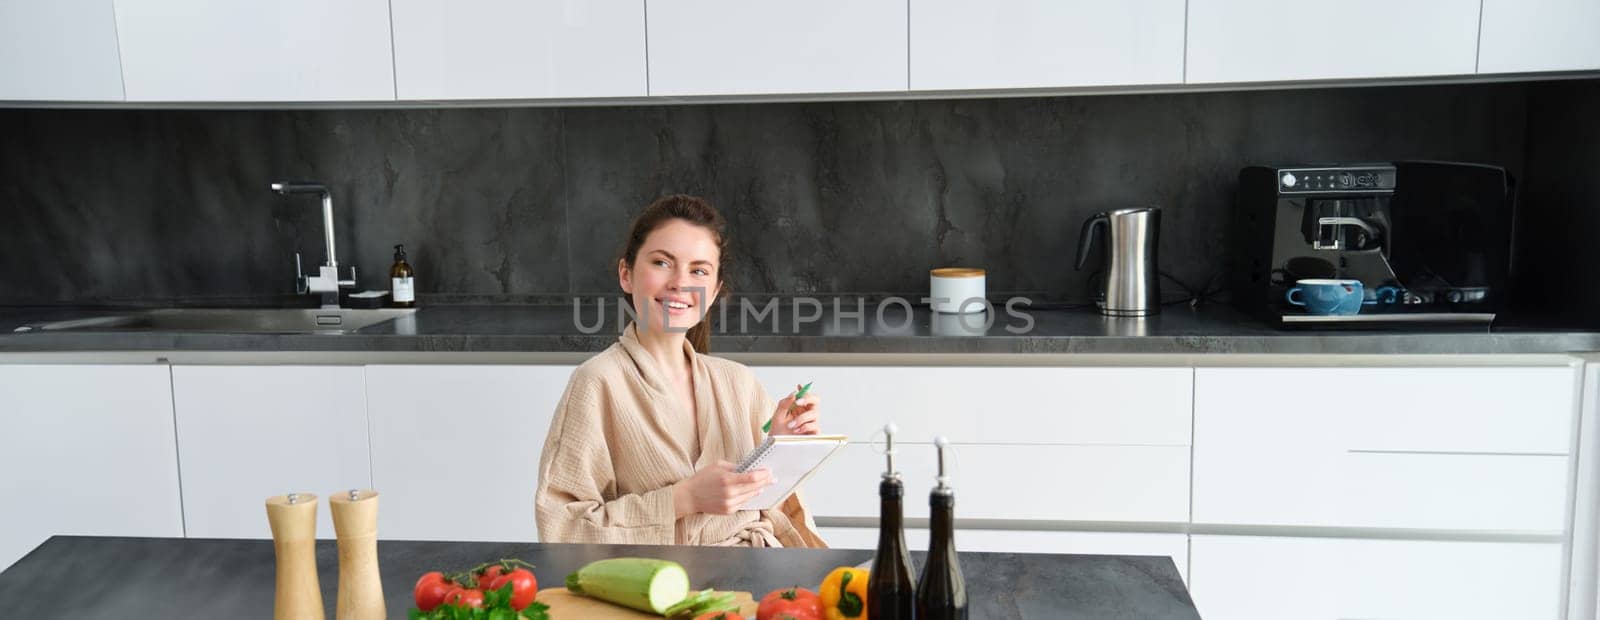 Portrait of woman thinking of menu, sitting in the kitchen and making grocery list, vegetables and meal ingredients on counter.